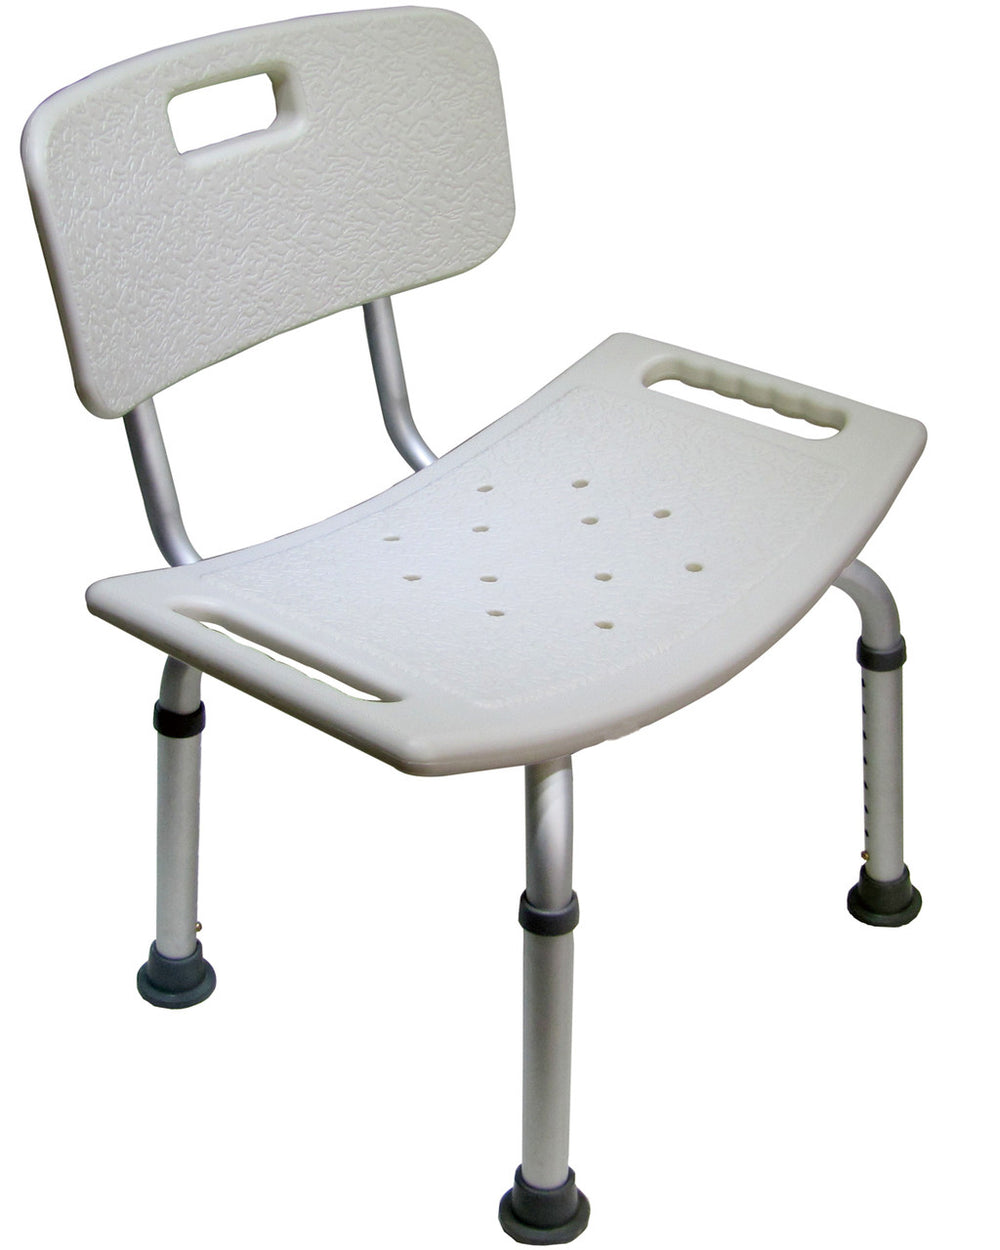 Bath Shower Chair with Back